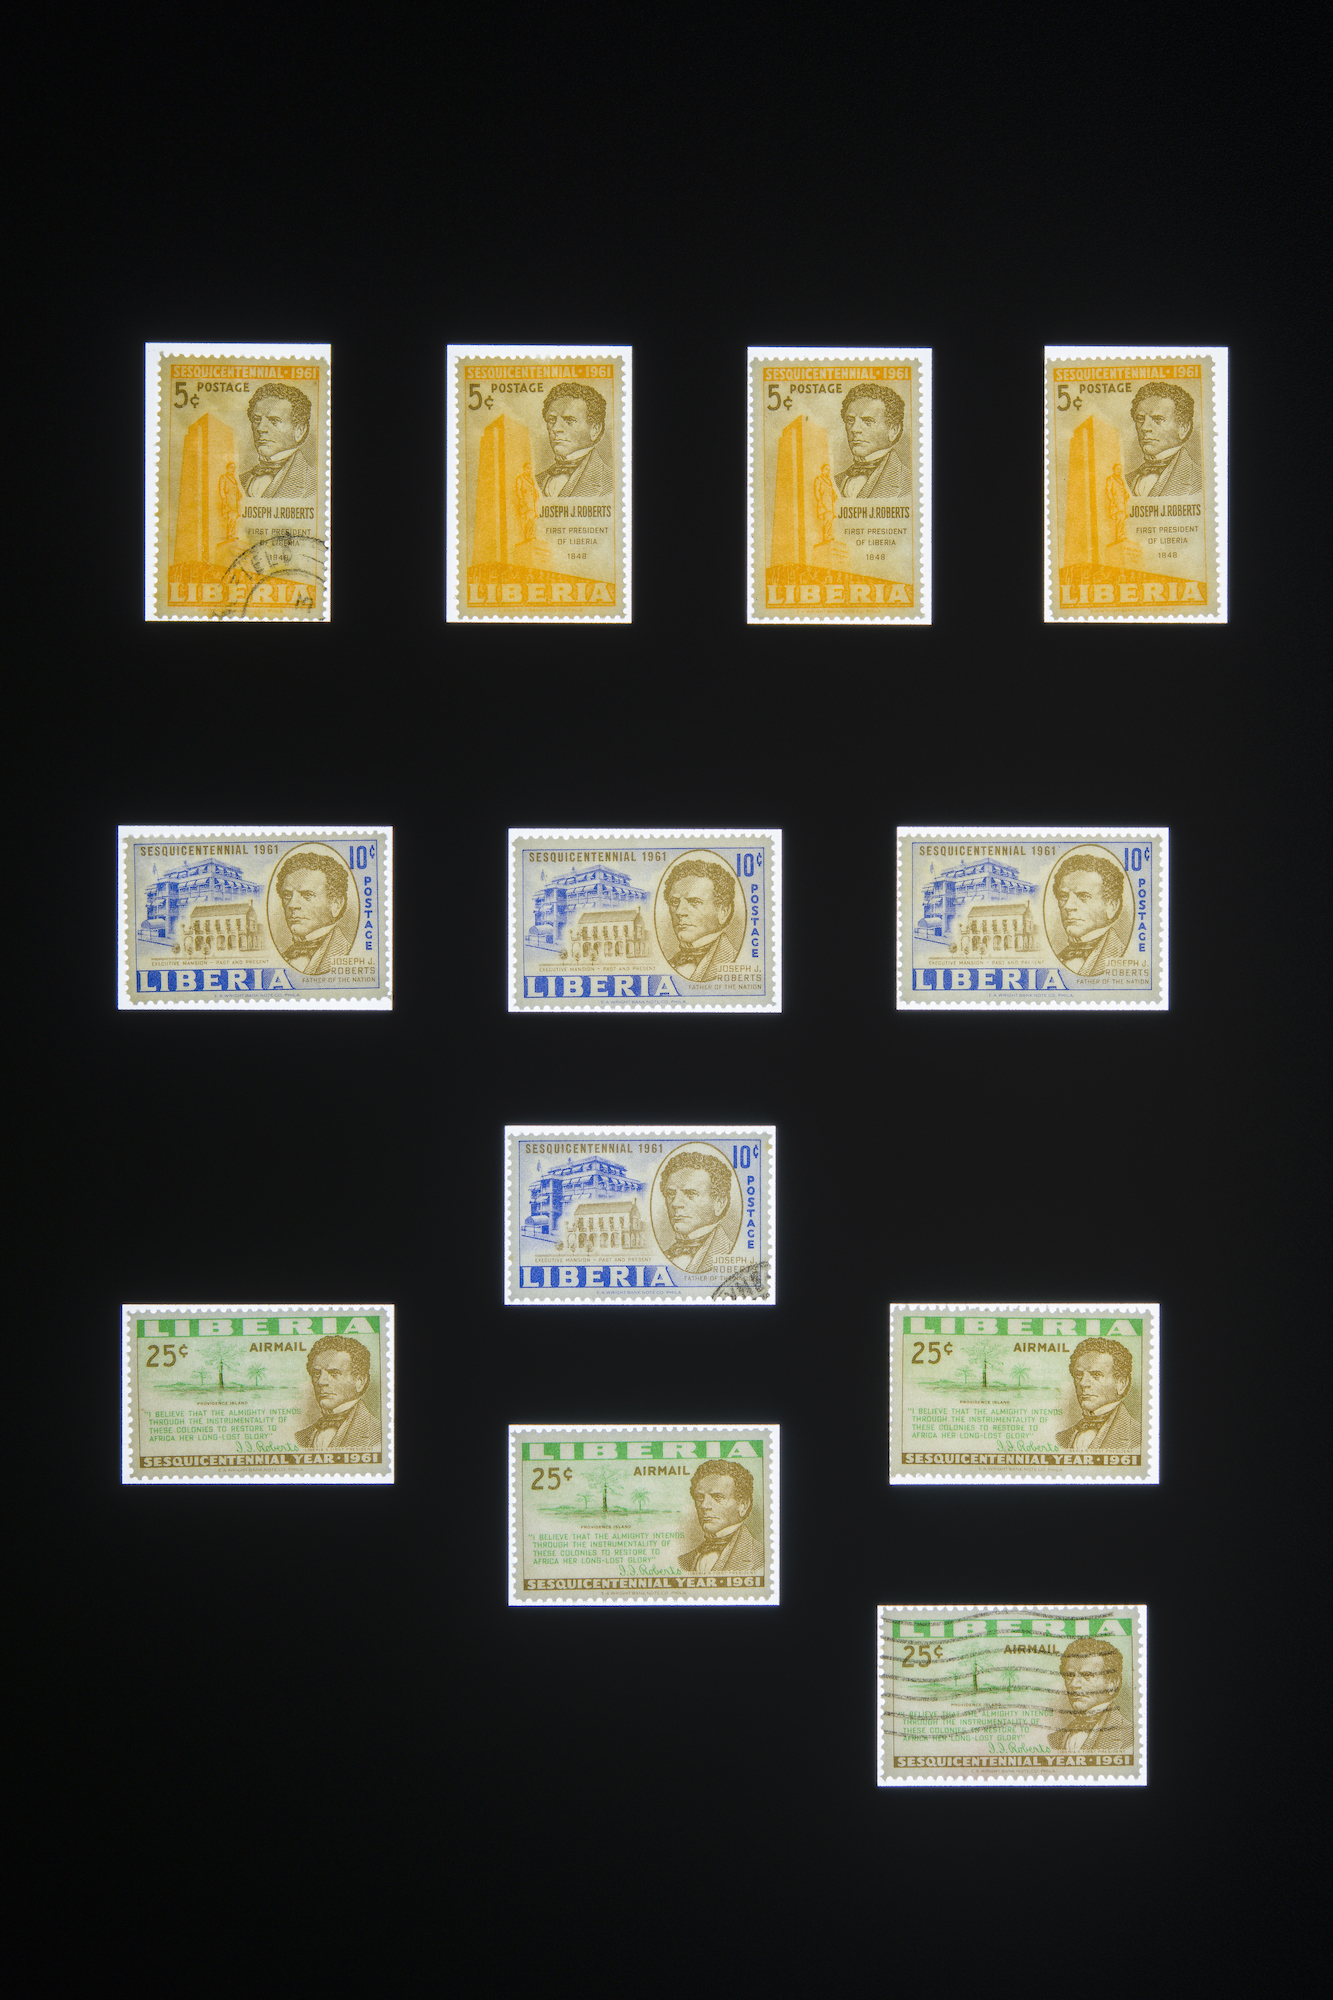 A series of stamps float amidst a black background with variations of color from yellow, to blue, to green and reading 